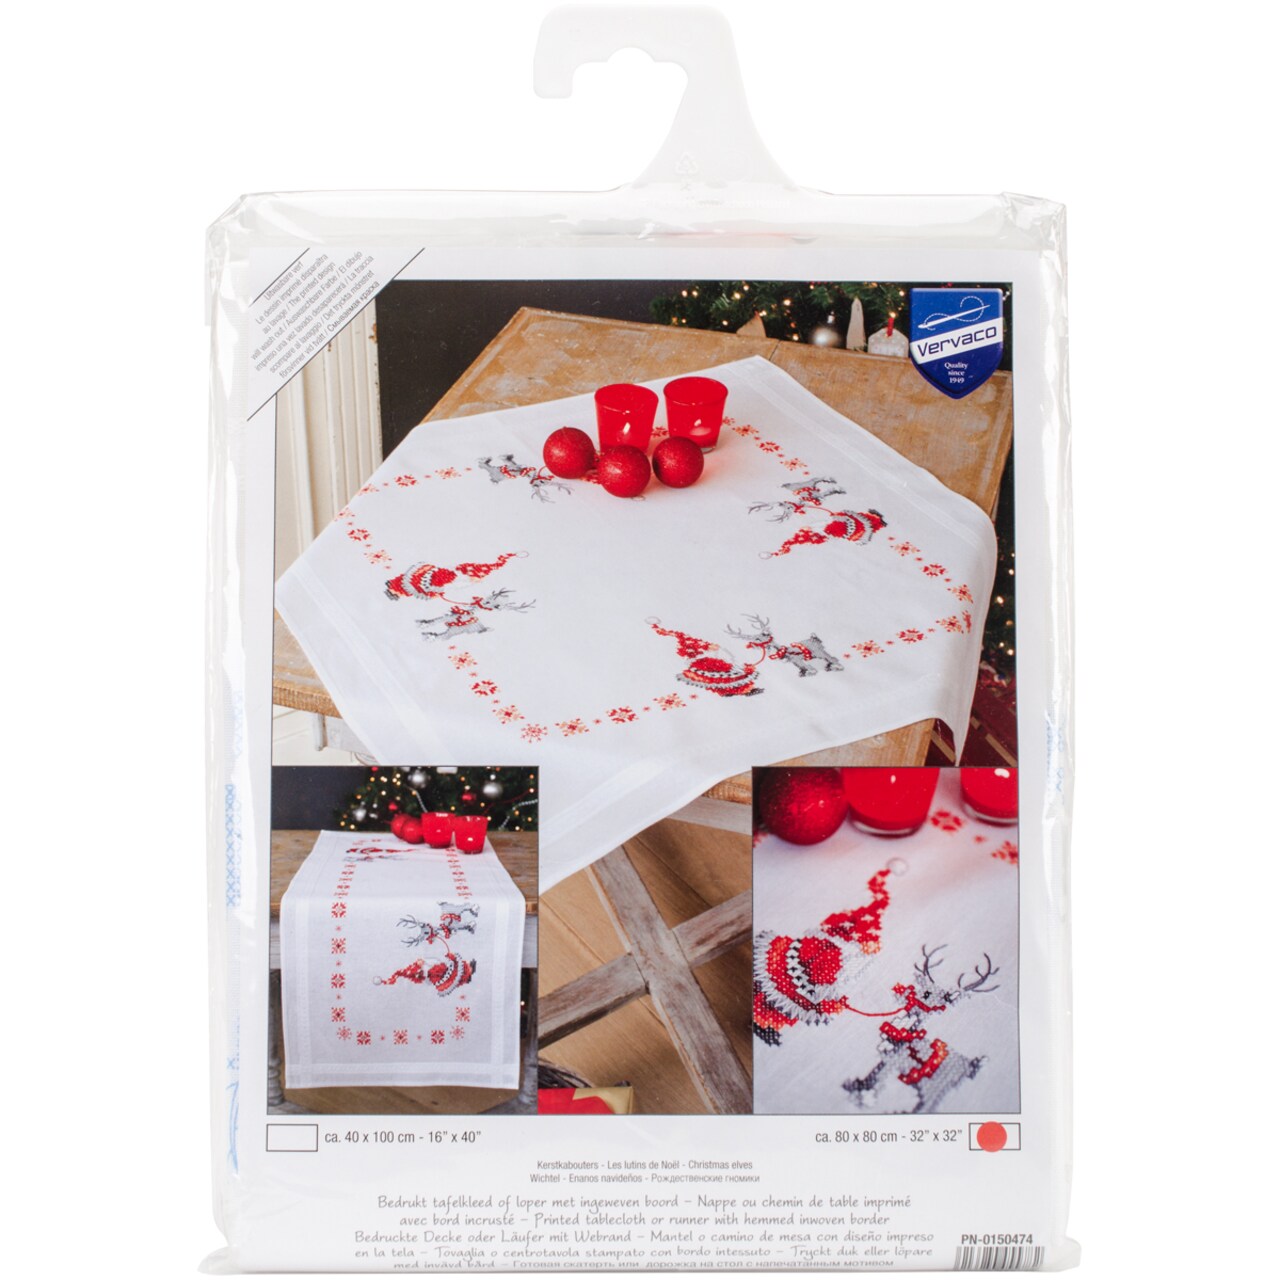 Vervaco Stamped Tablecloth Cross Stitch Kit 32X32-Christmas Elves